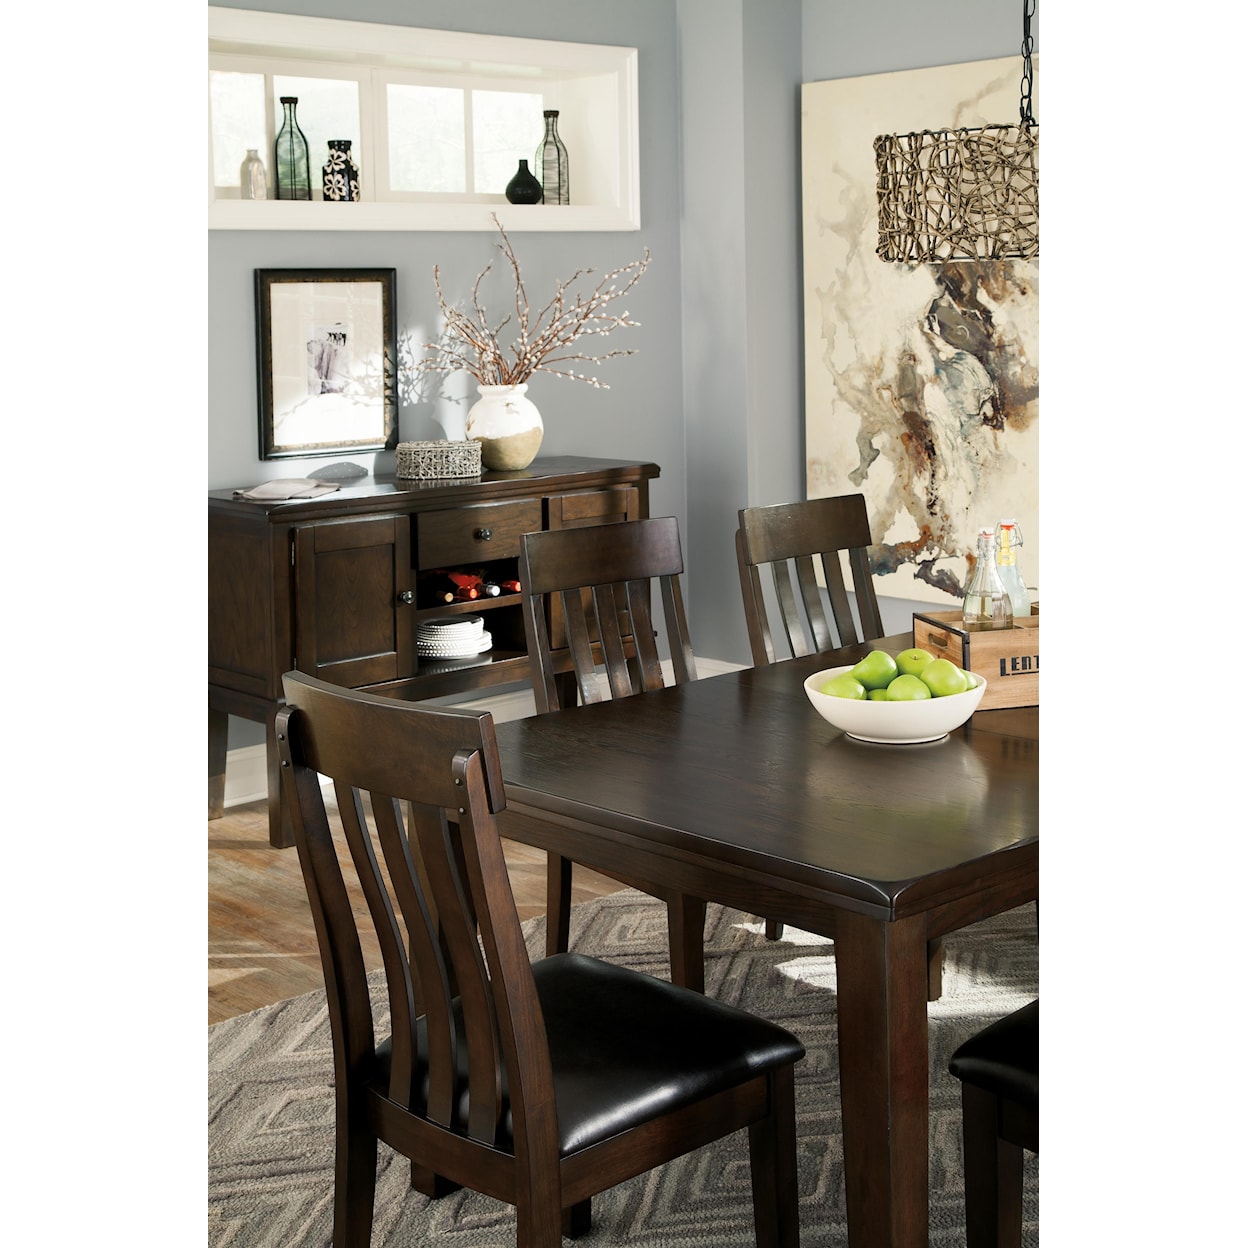 Signature Design by Ashley Haddigan Dining Upholstered Side Chair